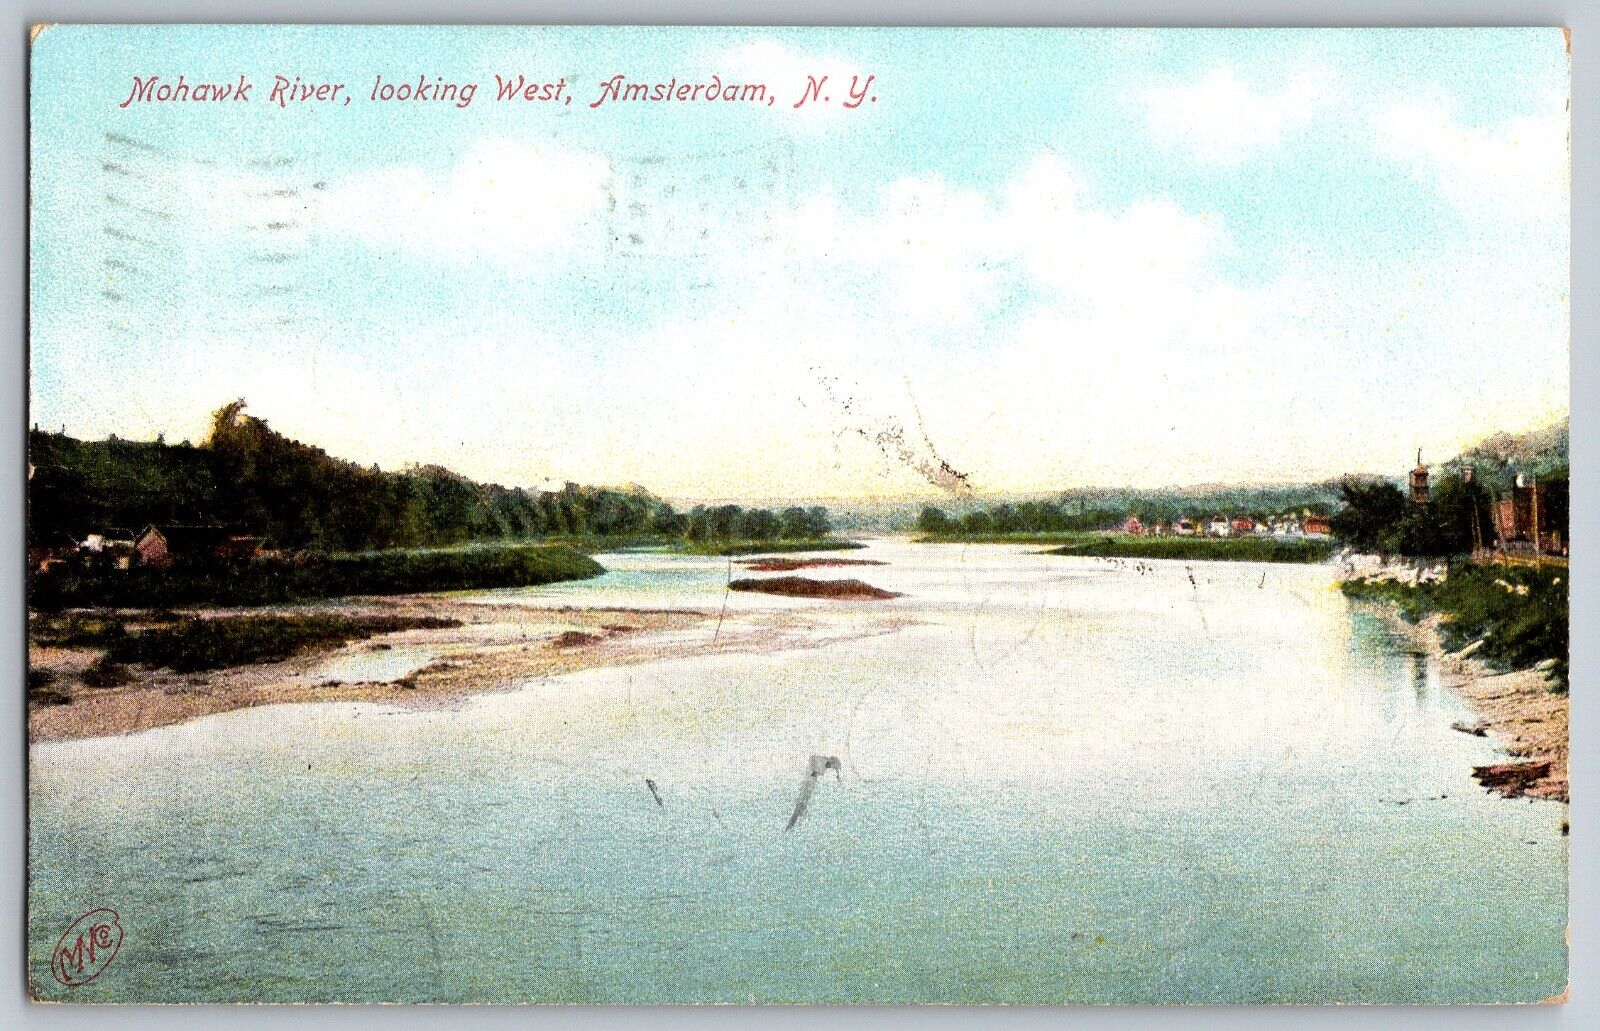 Amsterdam, New York - Mohawk River, Looking West - Vintage Postcard - Posted